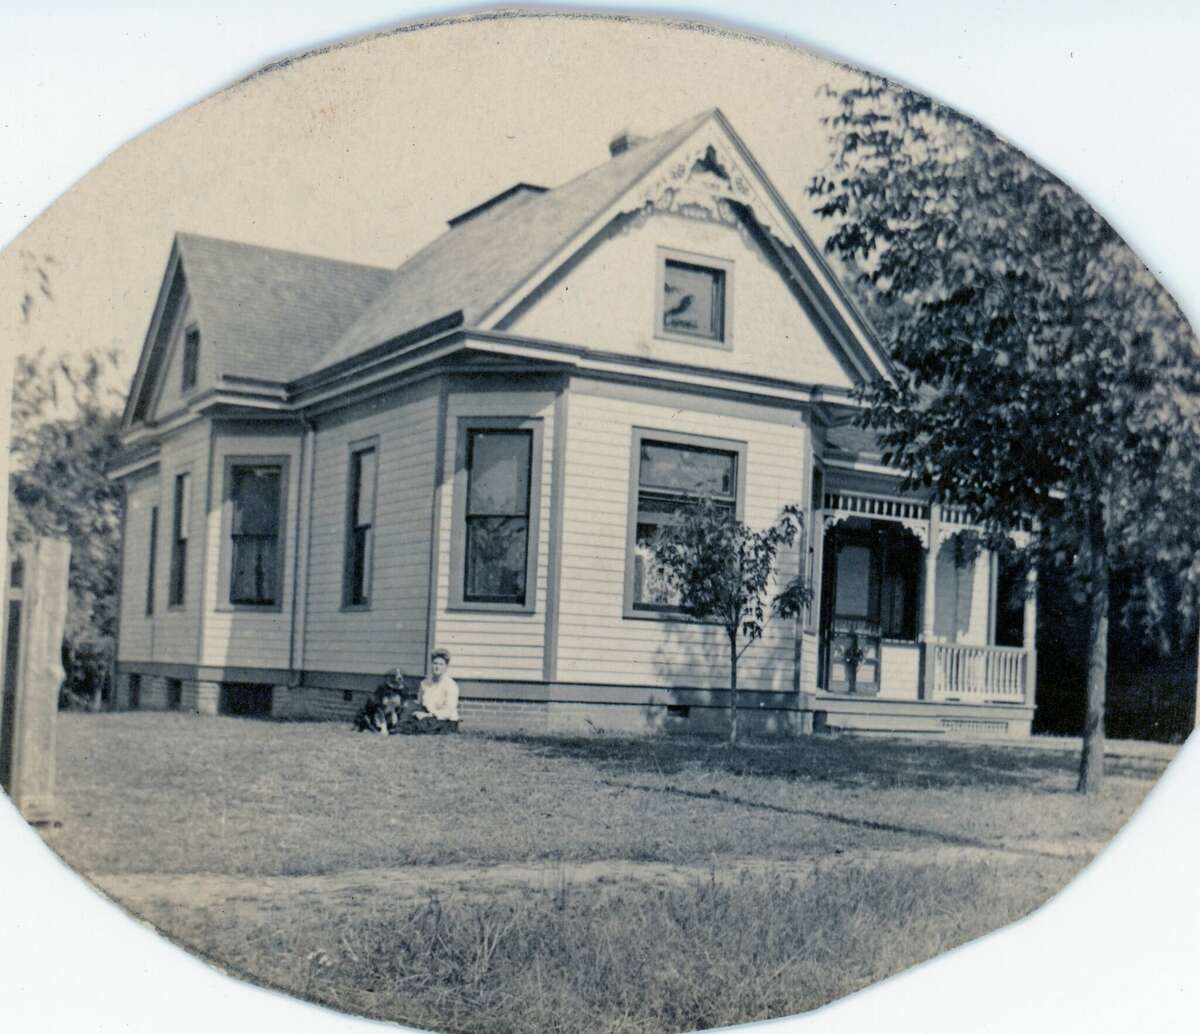 Early photograph of 718 Fairview Ave., which later became 718 N. Buchanan St., Edwardsville. 